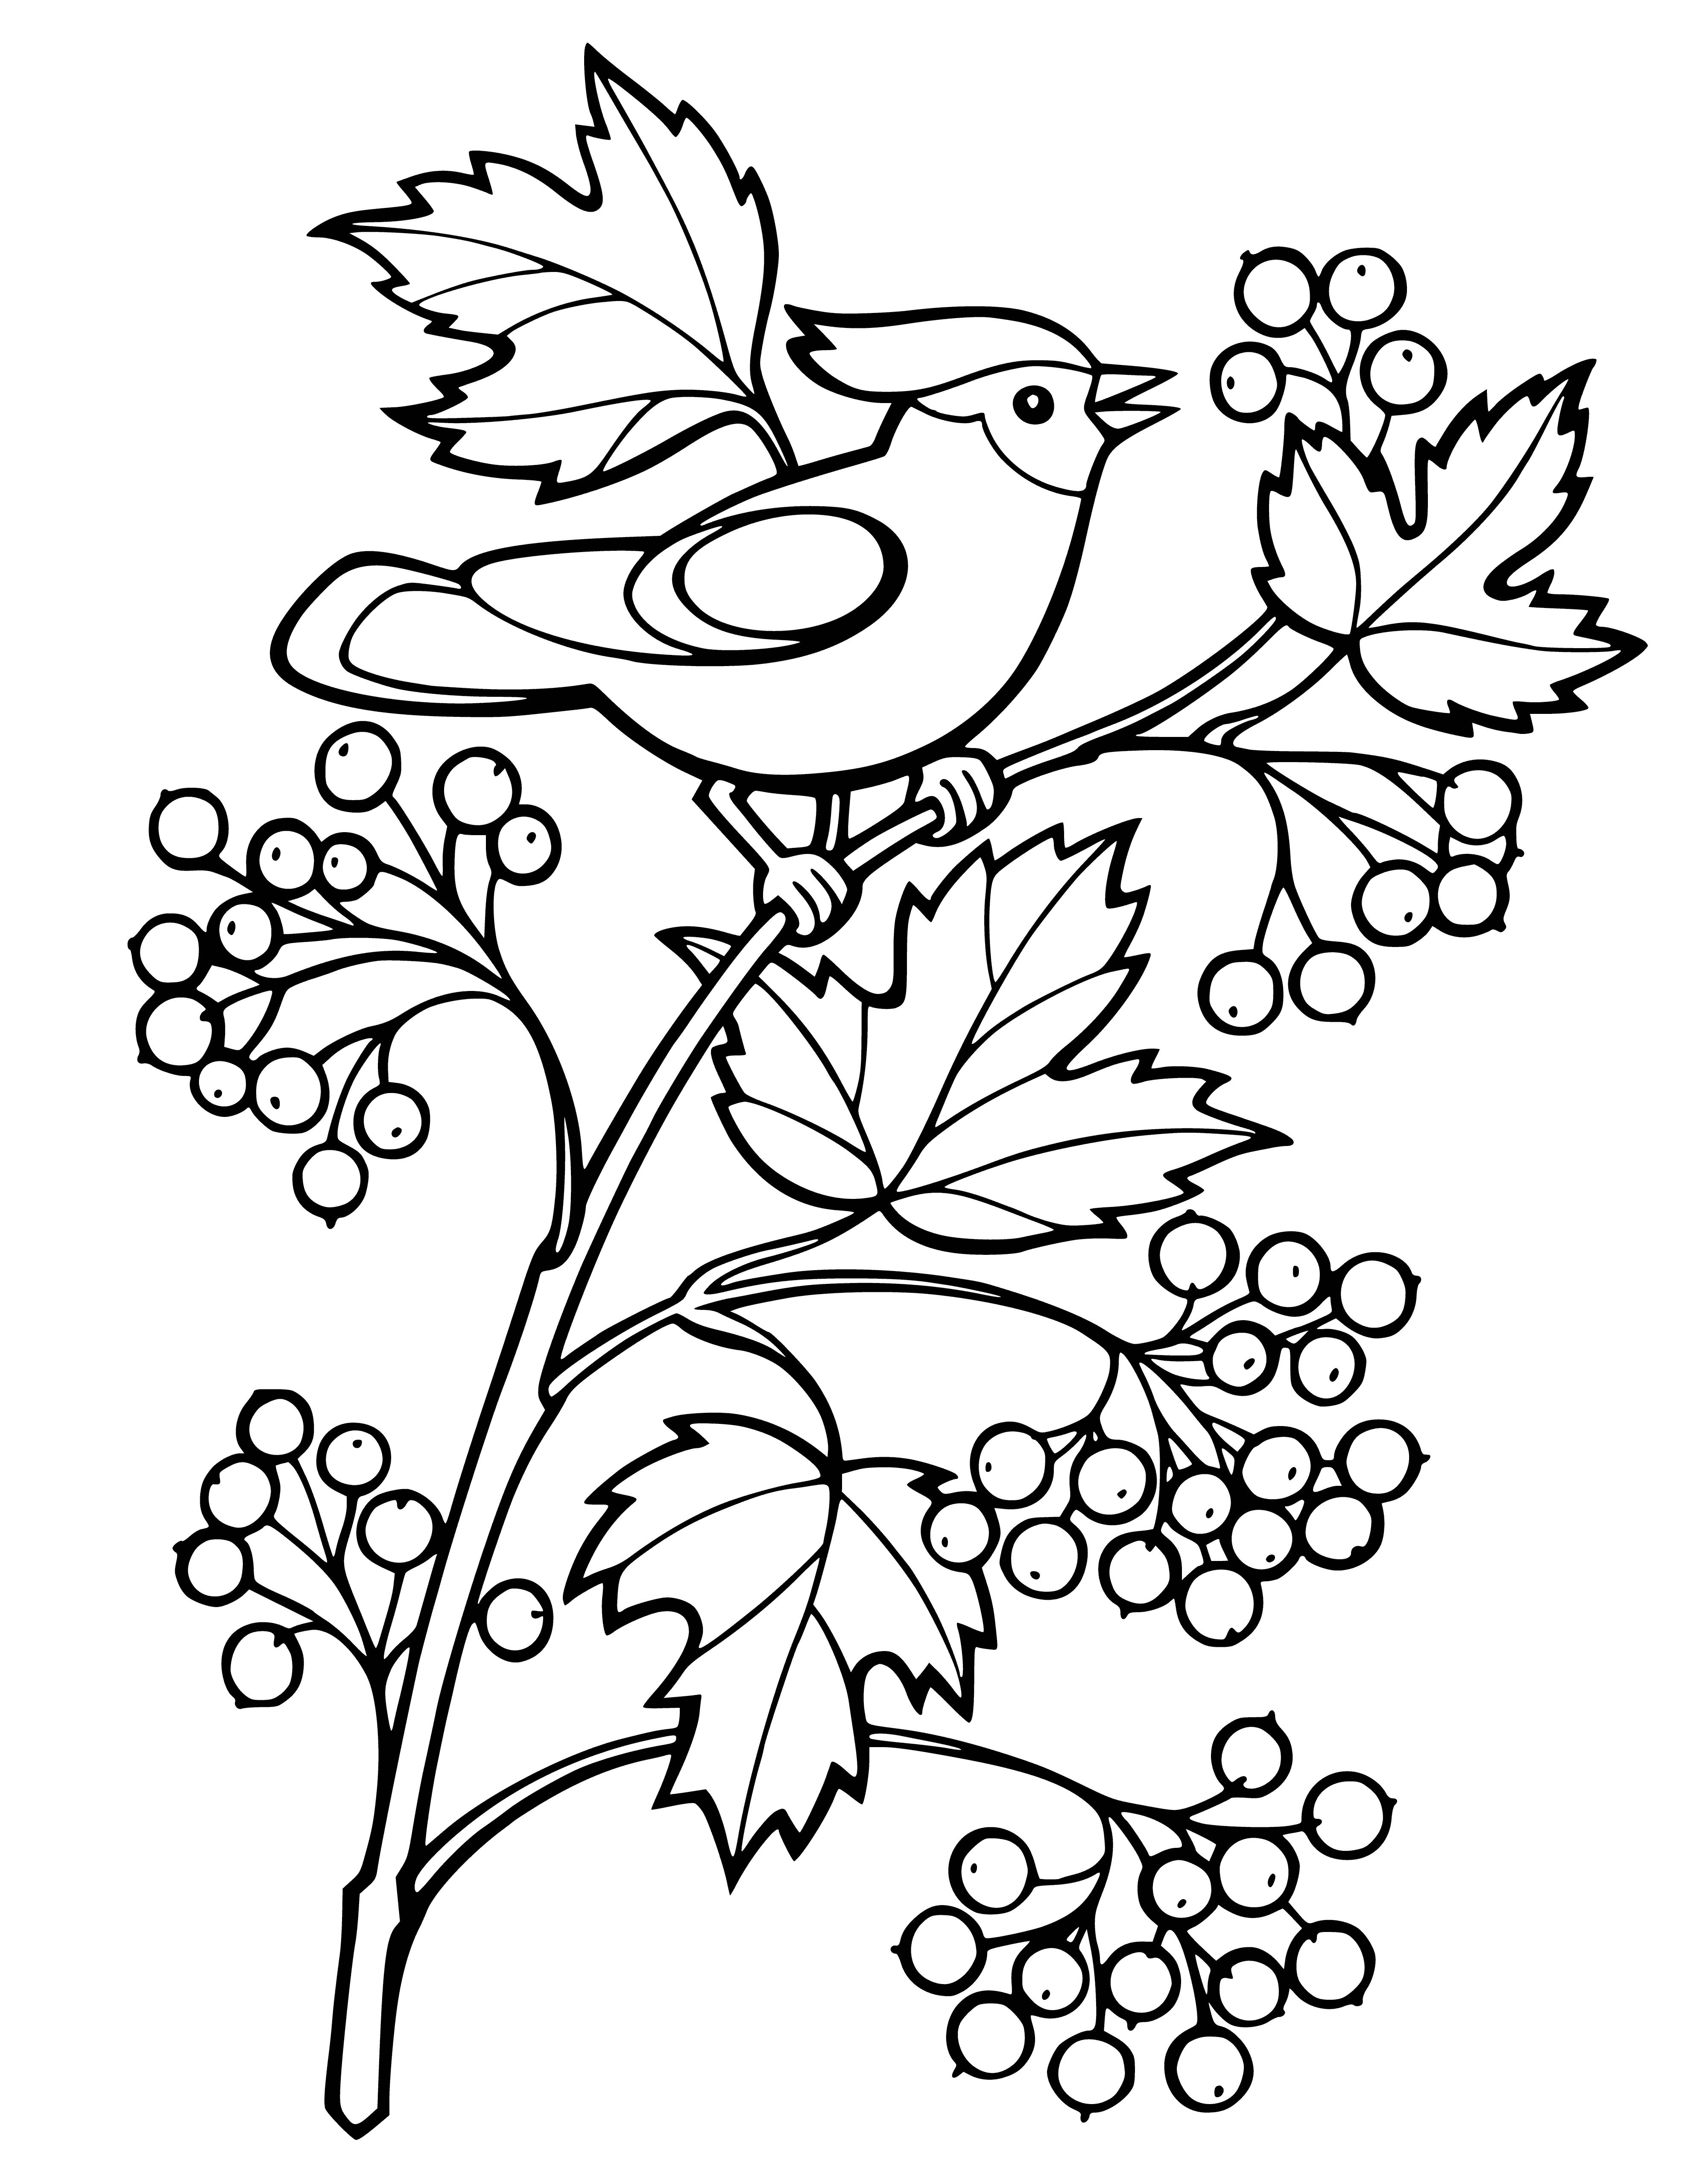 coloring page: Bush with white flower clusters, small leaves, and green-to-red berries.